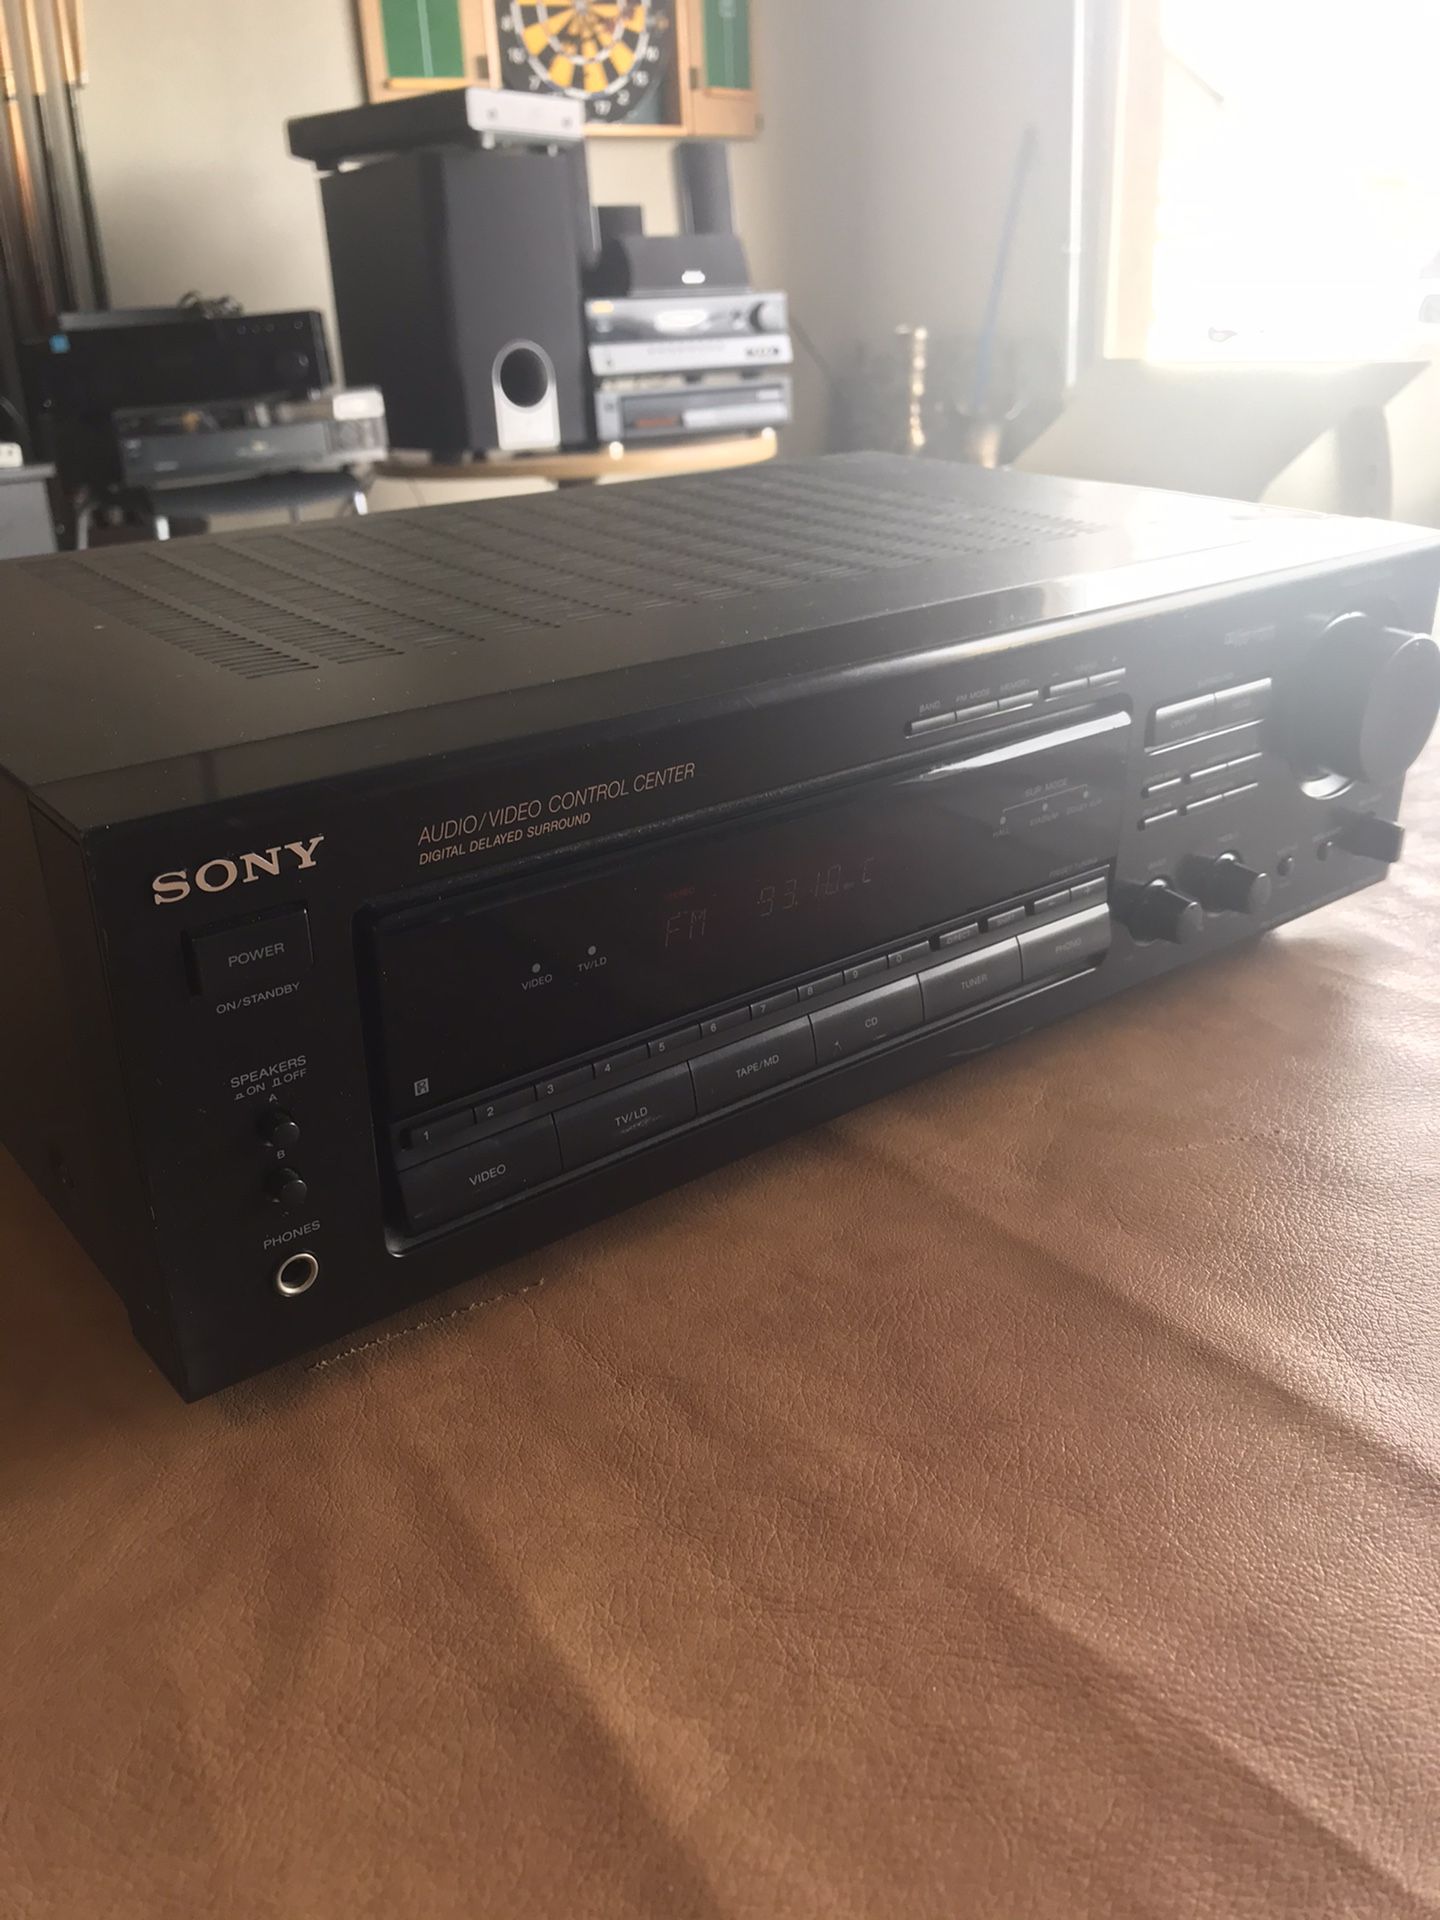 Sony 5.1 Digital Delayed Surround Stereo Receiver